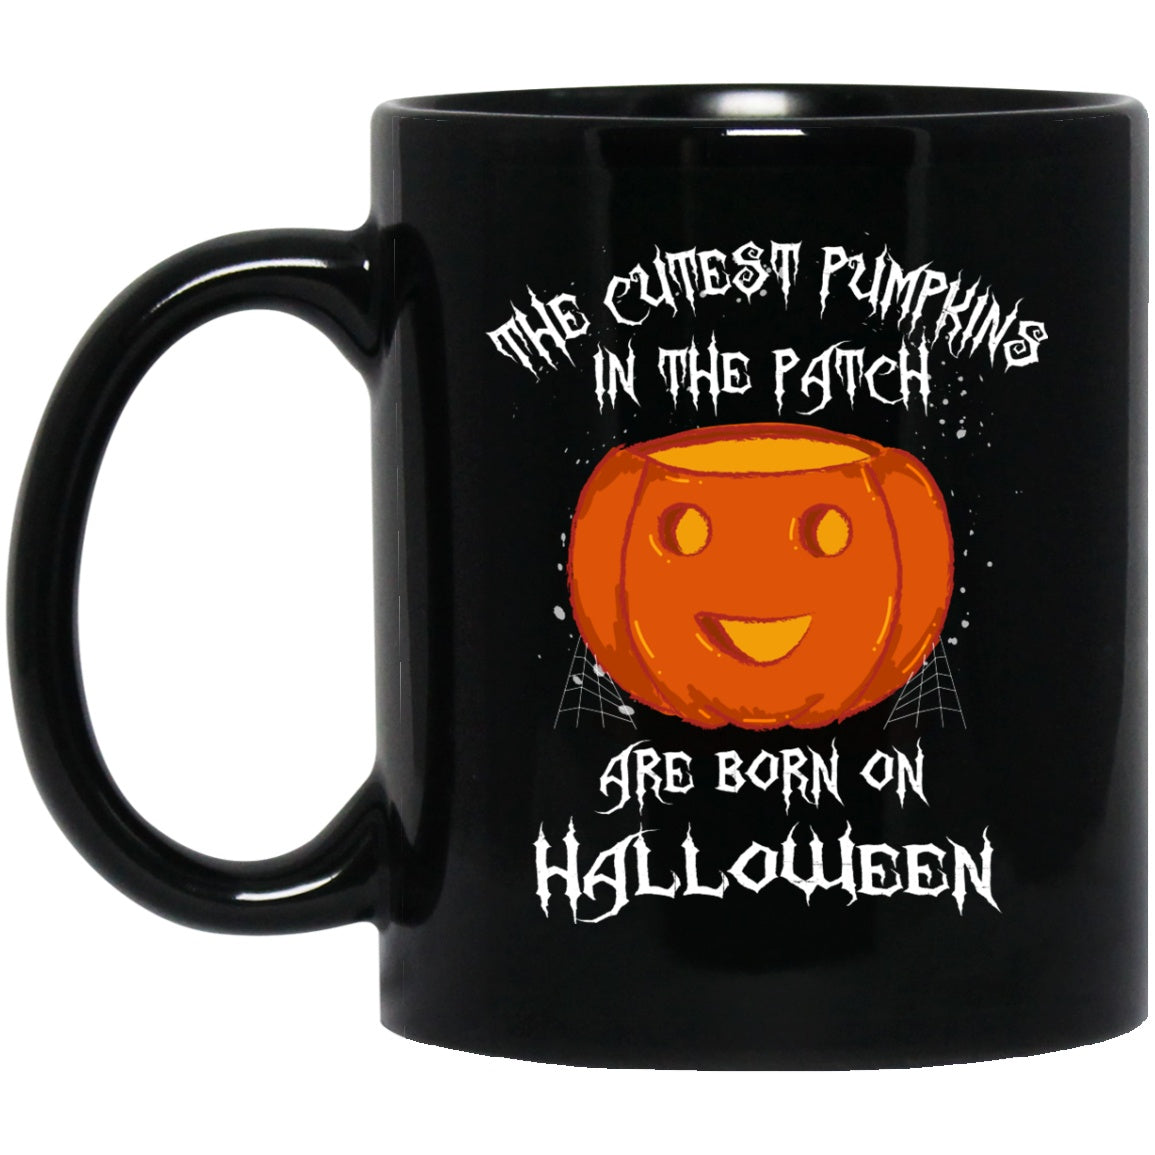 Halloween Birthday Mug, the cutest pumpkins in the patch are born on Halloween, Mugs - GoneBold.gift